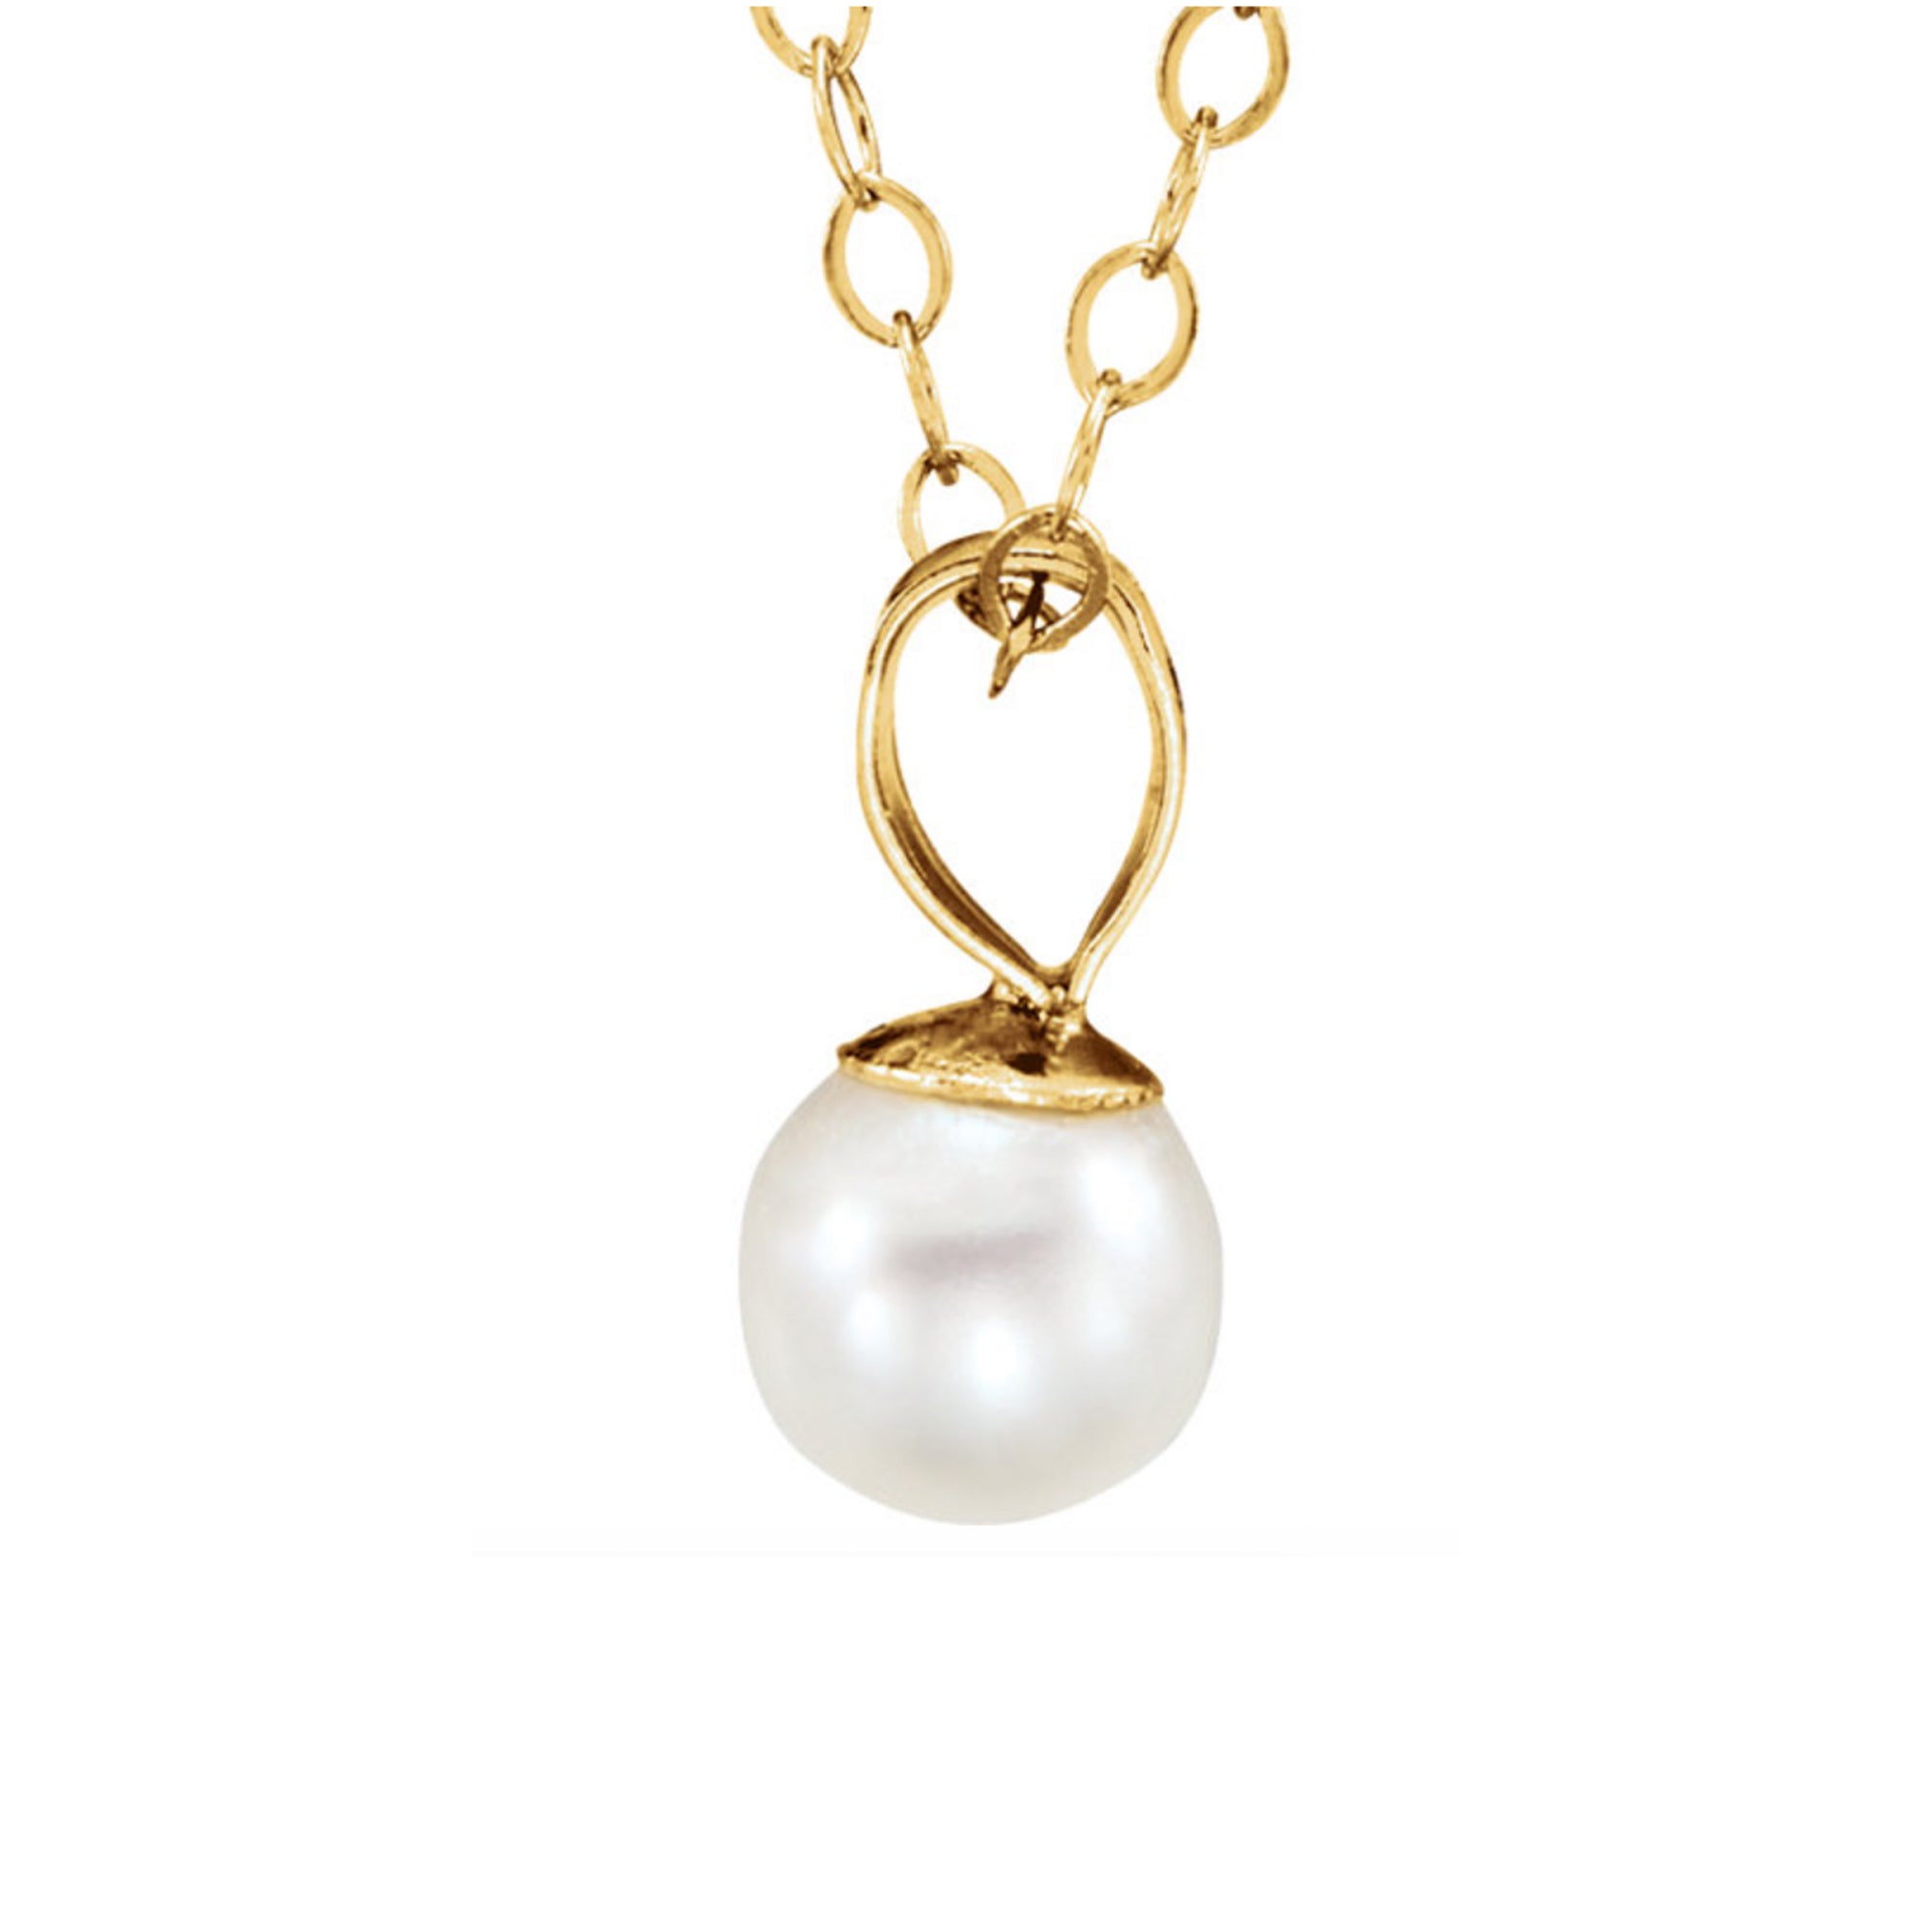 Pearl Drop Necklace in White, Yellow or Rose Gold - Talisman Collection Fine Jewelers